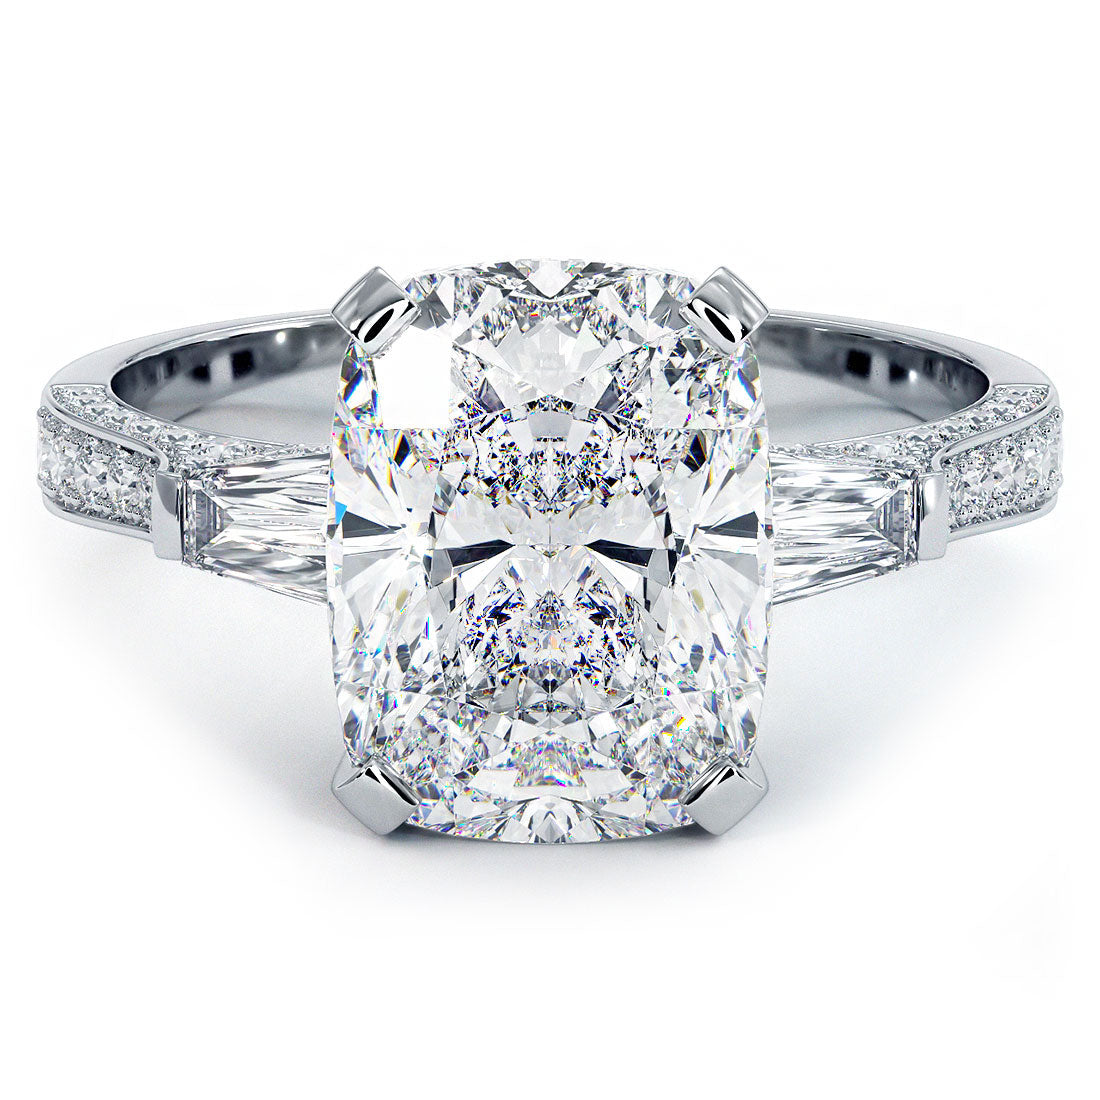 3-Carat Diamond Engagement Rings – Are They Big Enough?